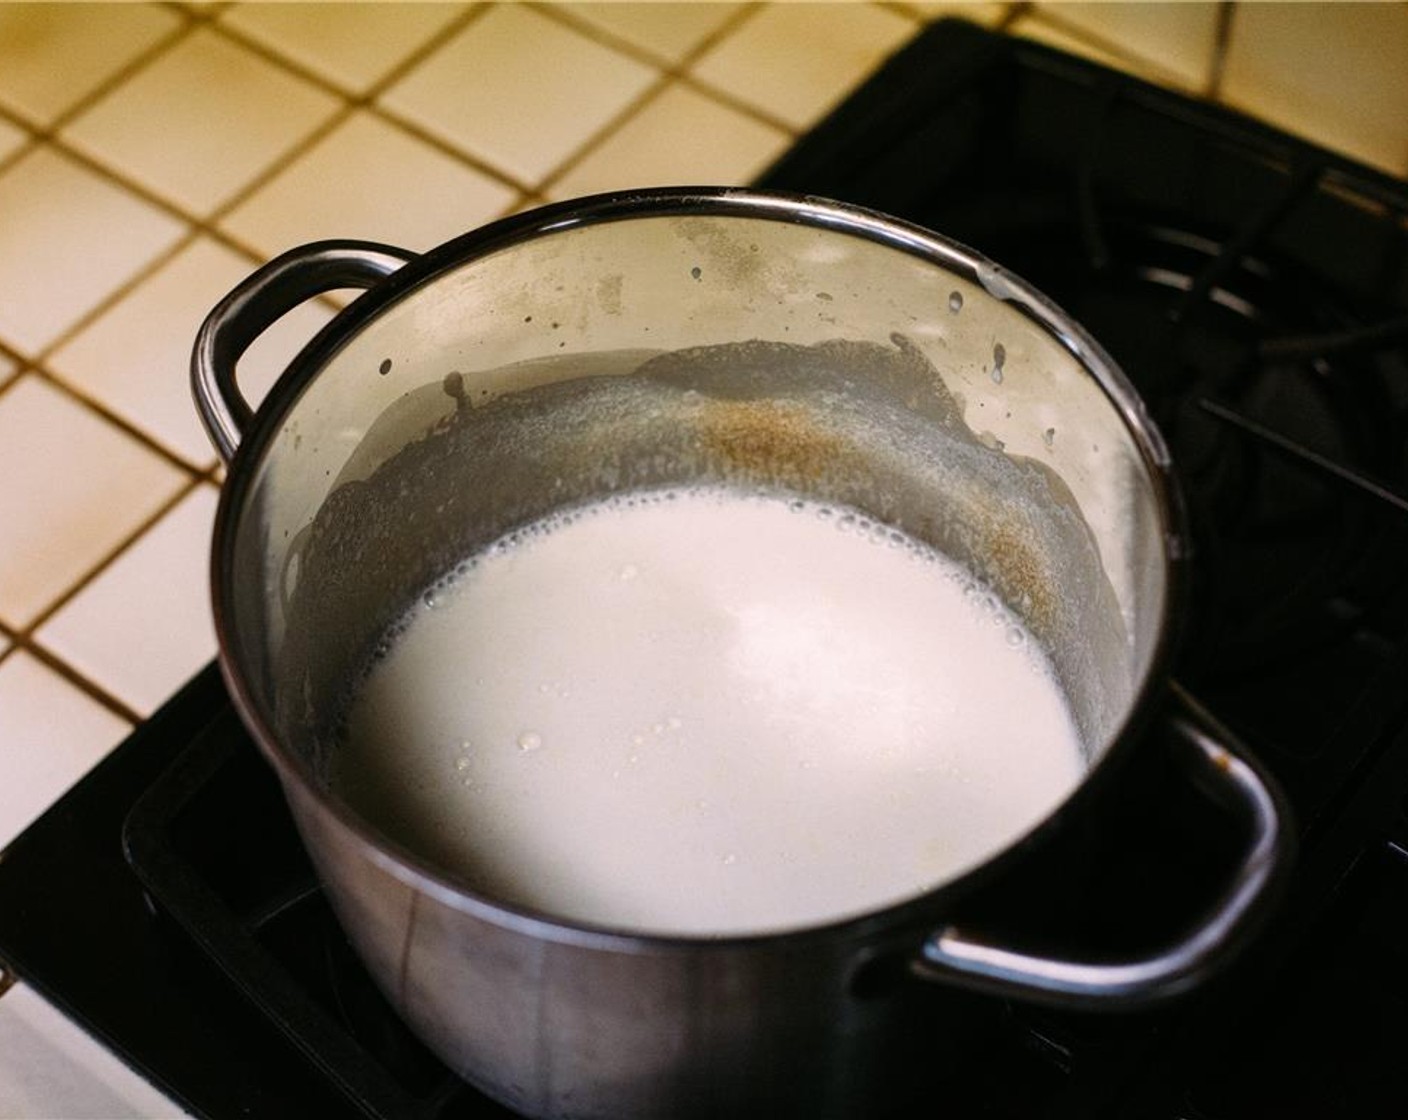 step 1 In a 4-quart saucepan, combine Milk (2 cups), Heavy Cream (2 cups), and half of the Granulated Sugar (1 1/4 cups). Set over high heat, and cook, stirring occasionally, until mixture comes to a boil, about 5 minutes.